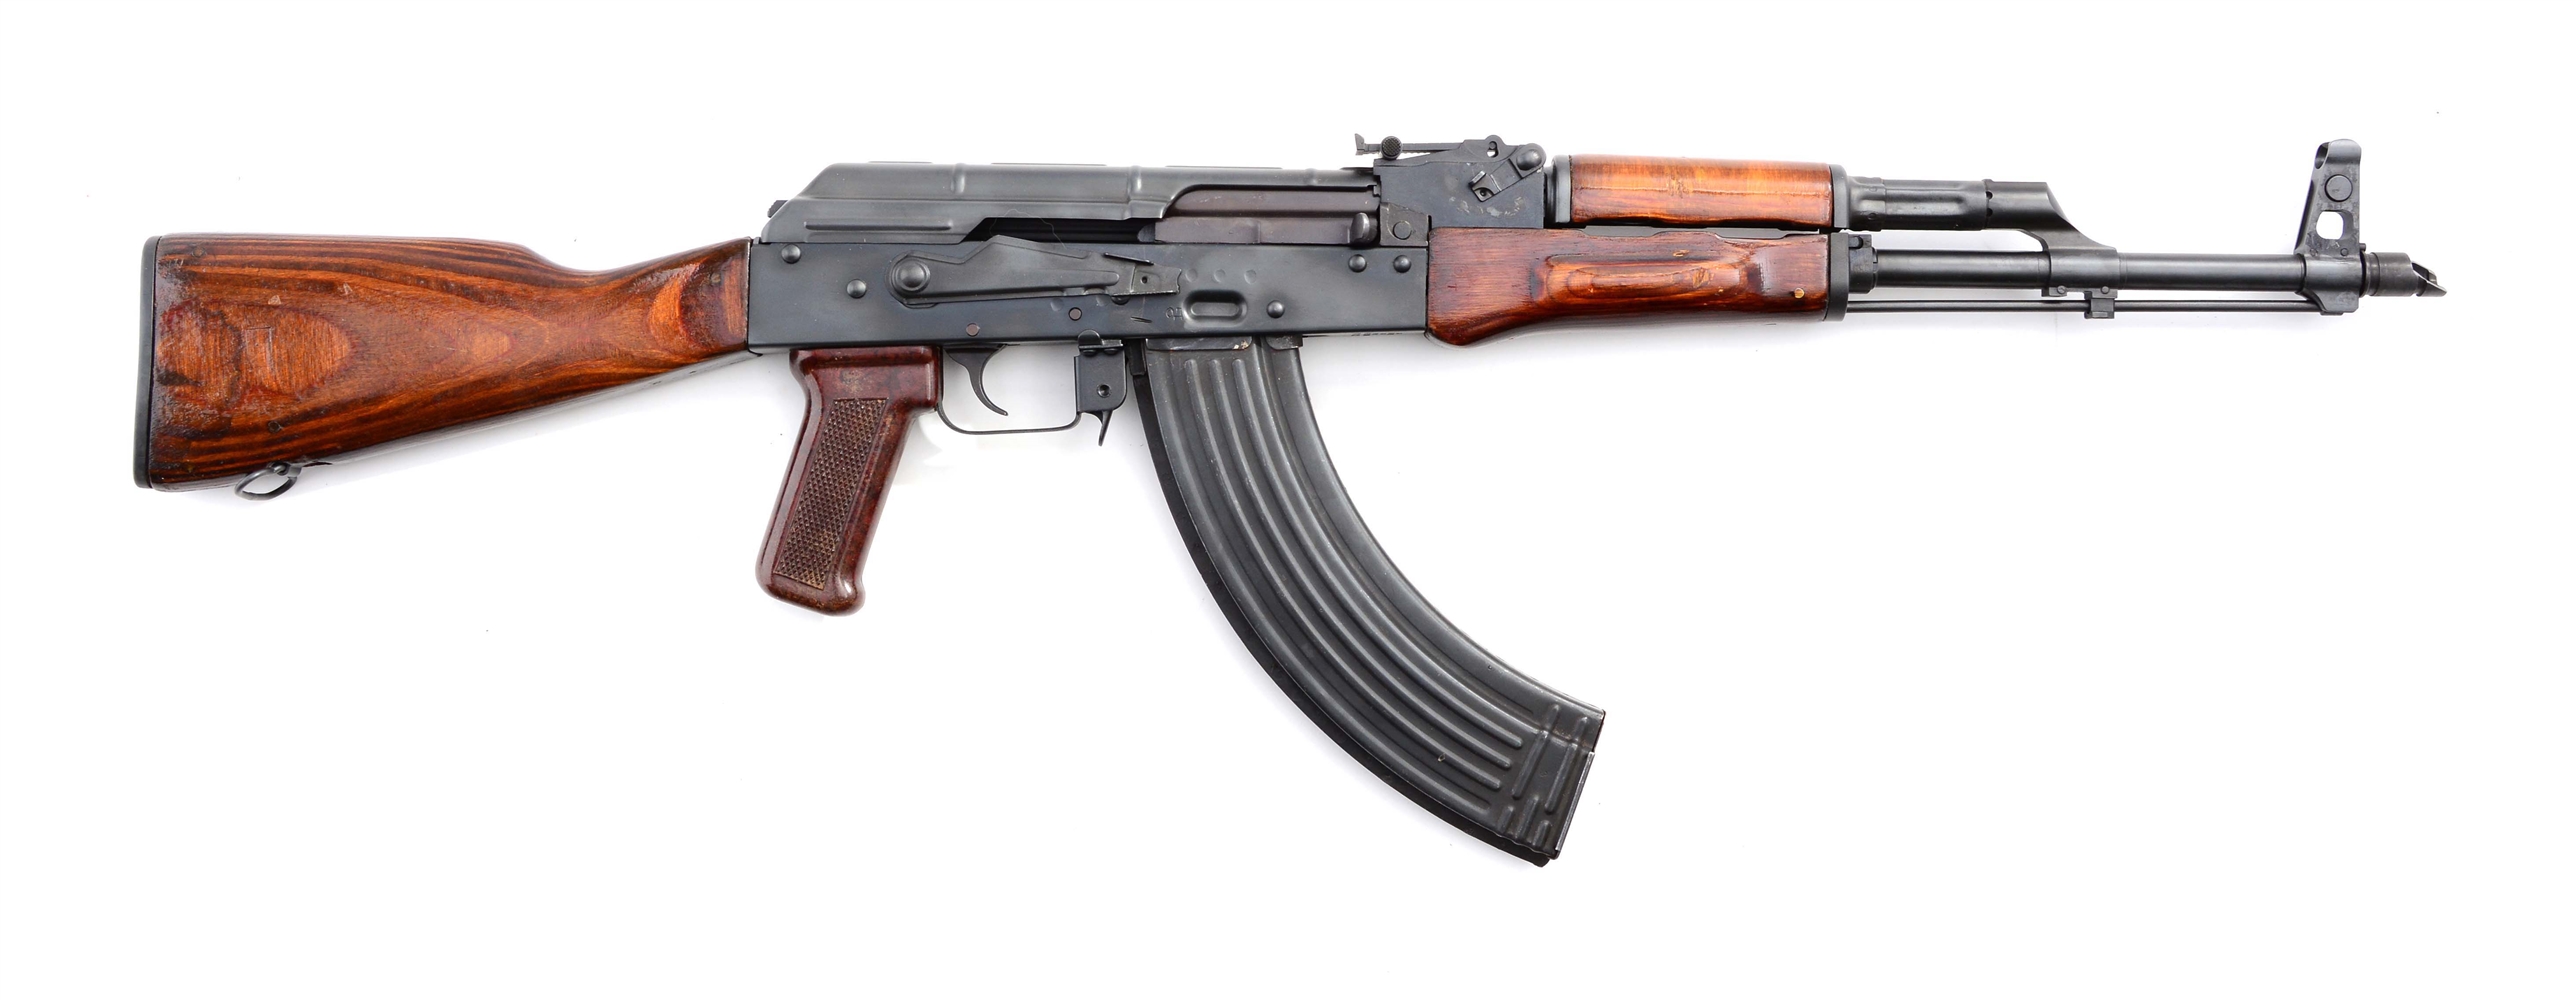 These Are The Biggest Myths About the Infamous AK-47 | The 